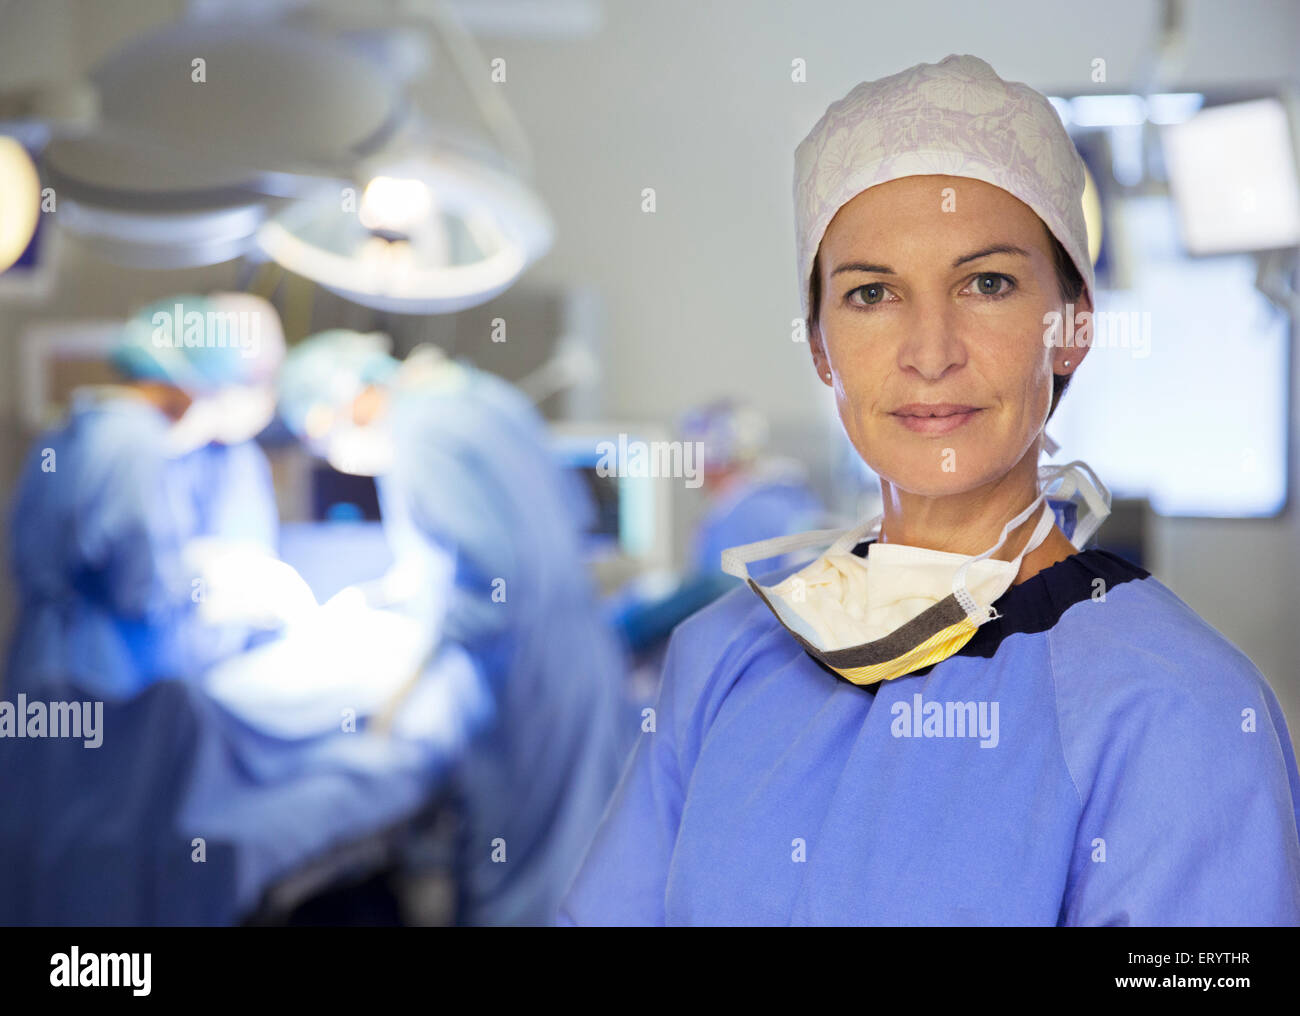 Portrait of smiling surgeon in operating room Banque D'Images